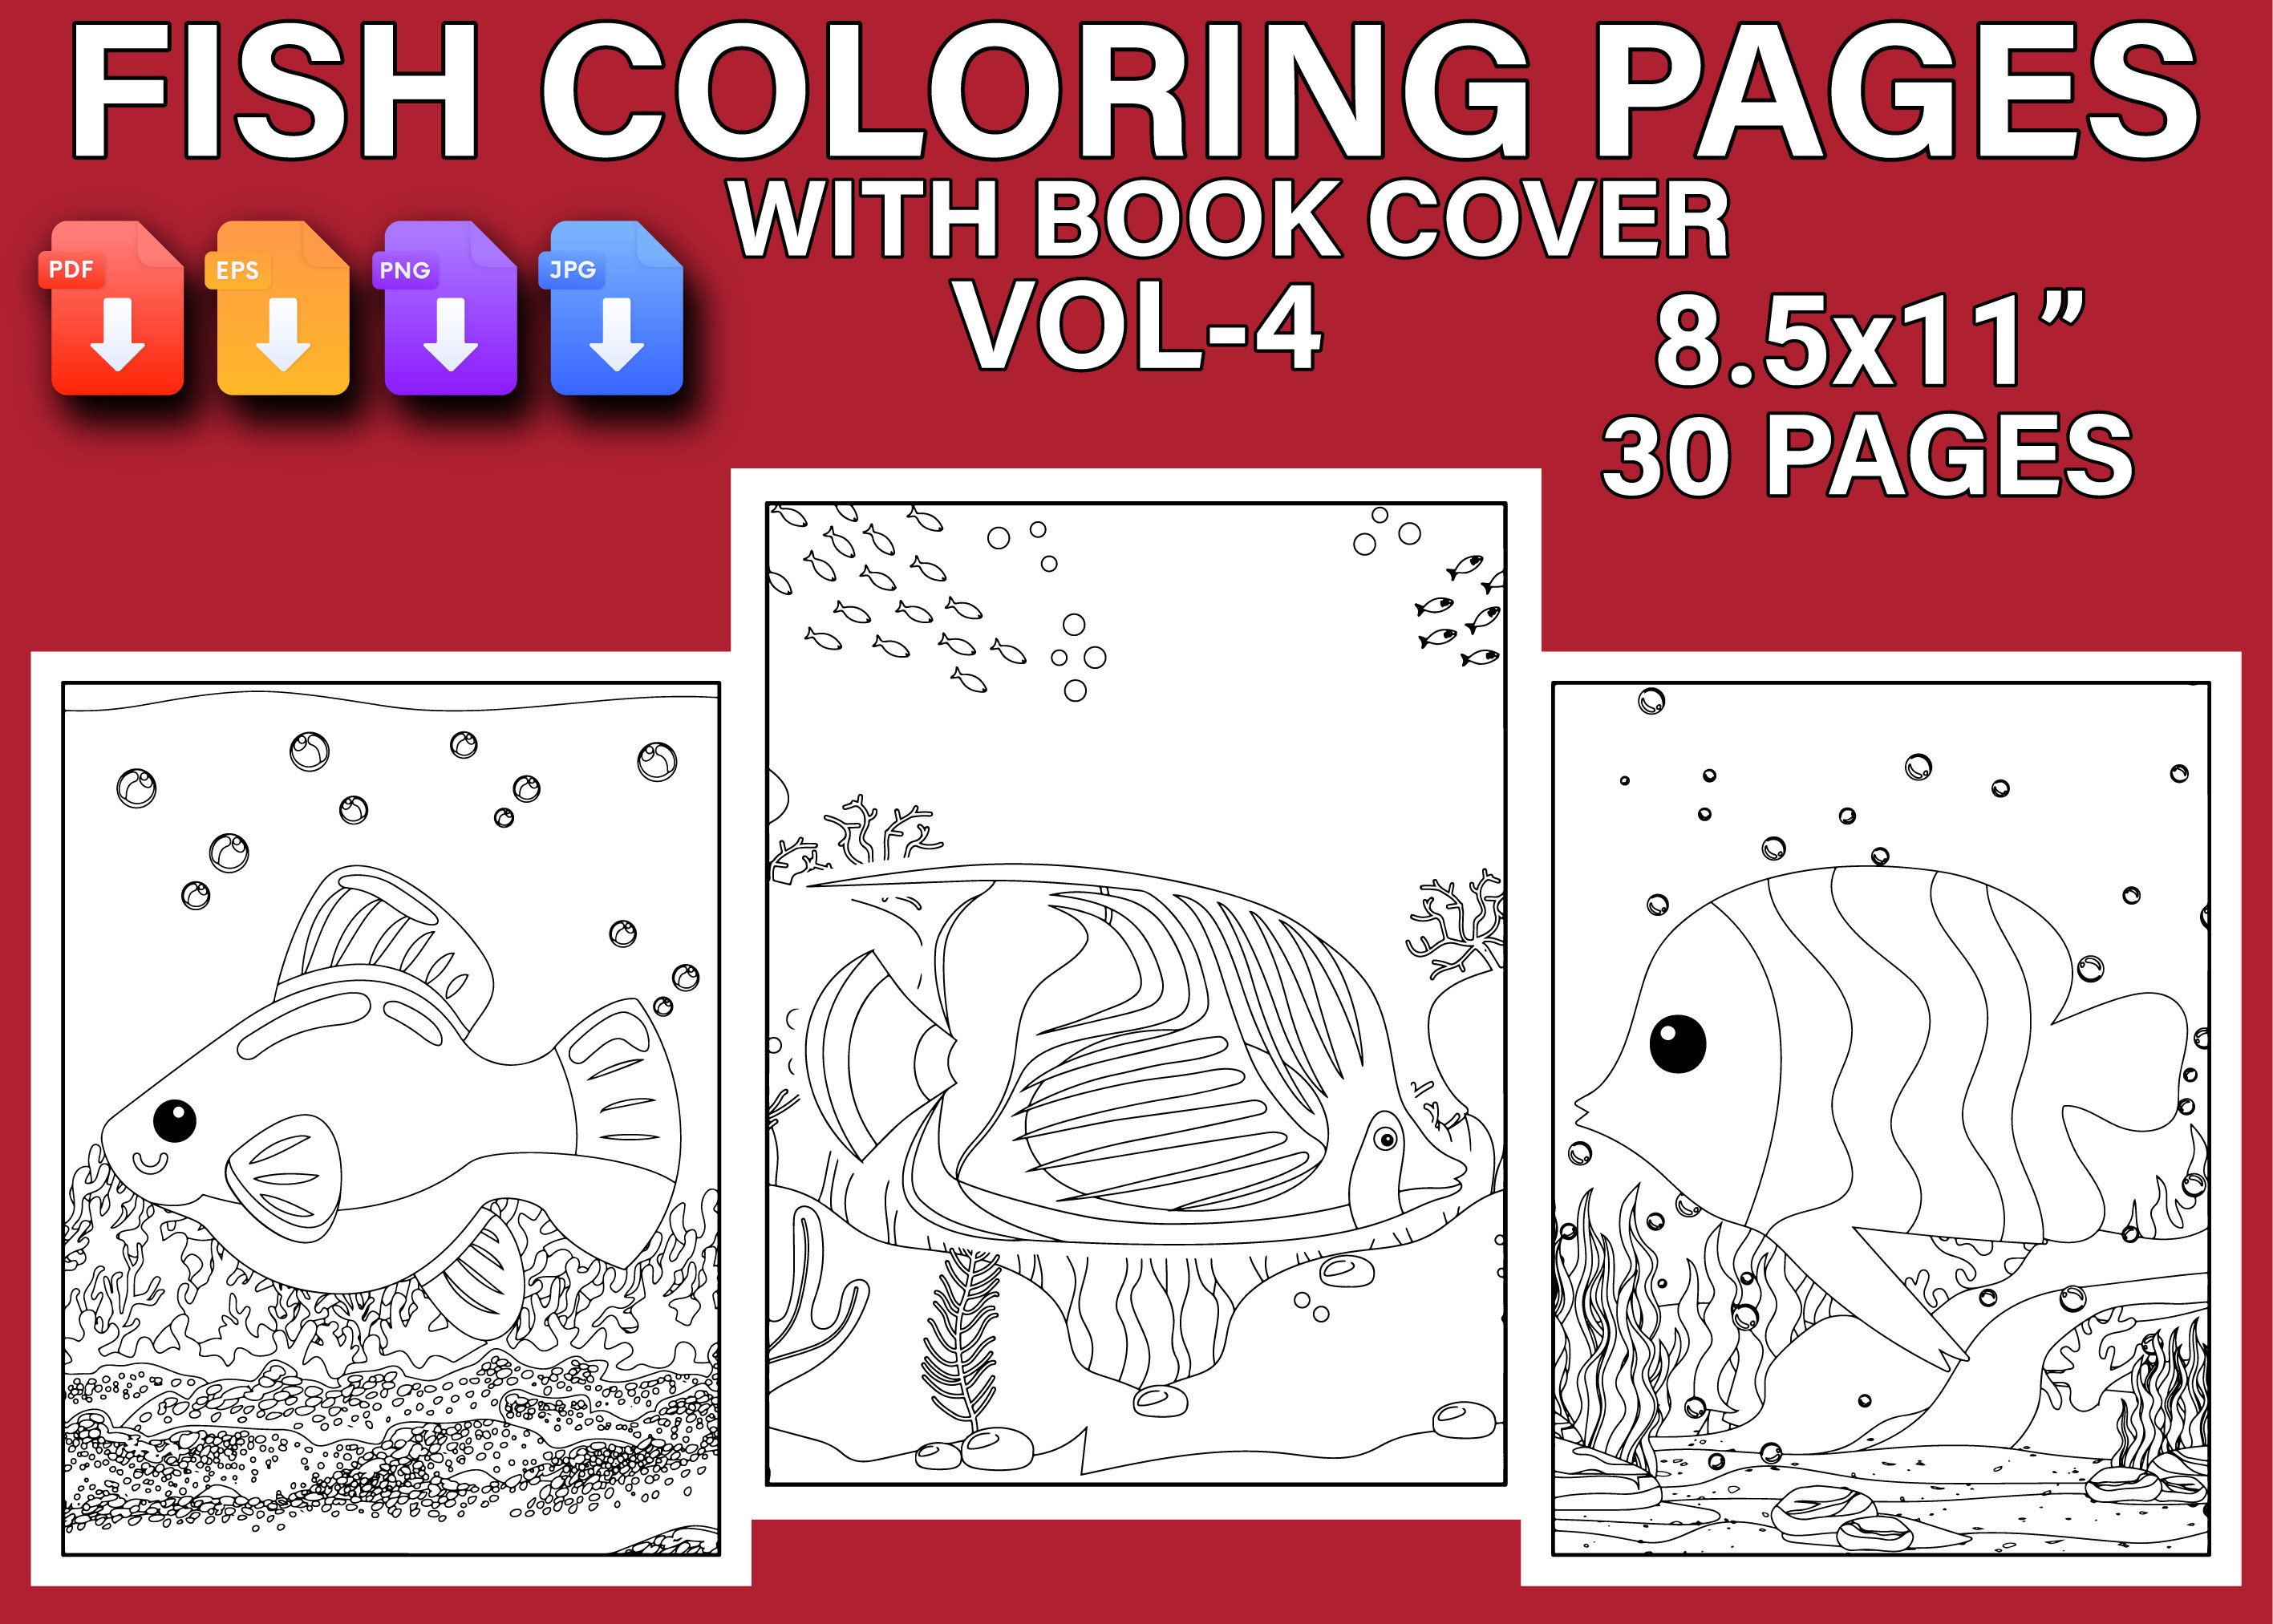 https://www.creativefabrica.com/wp-content/uploads/2022/02/18/Fish-Coloring-Pages-with-Book-Cover-Graphics-25515462-1.jpg